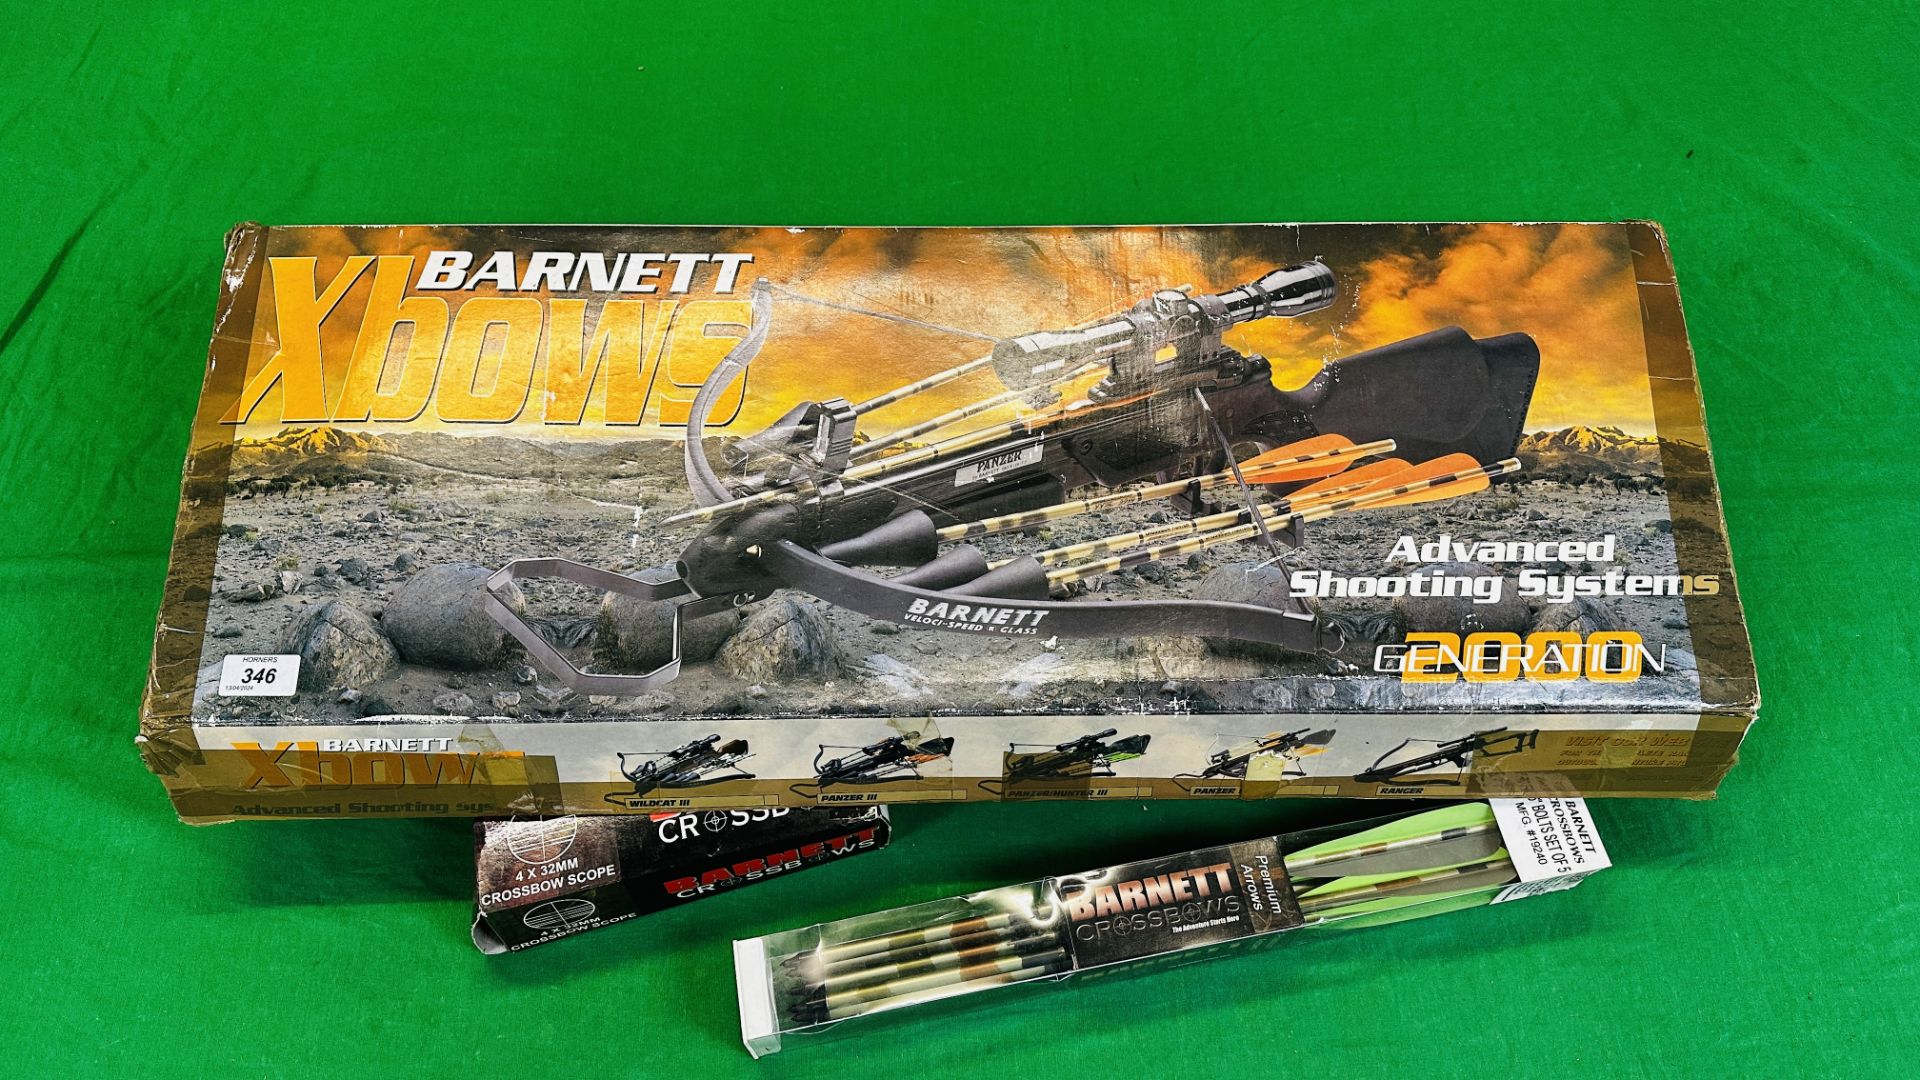 BOXED BARNETT XBOWS CROSSBOW WITH ARROWS AND 4X32 SCOPE - NO POSTAGE OF PACKING AVAILABLE - Image 3 of 8